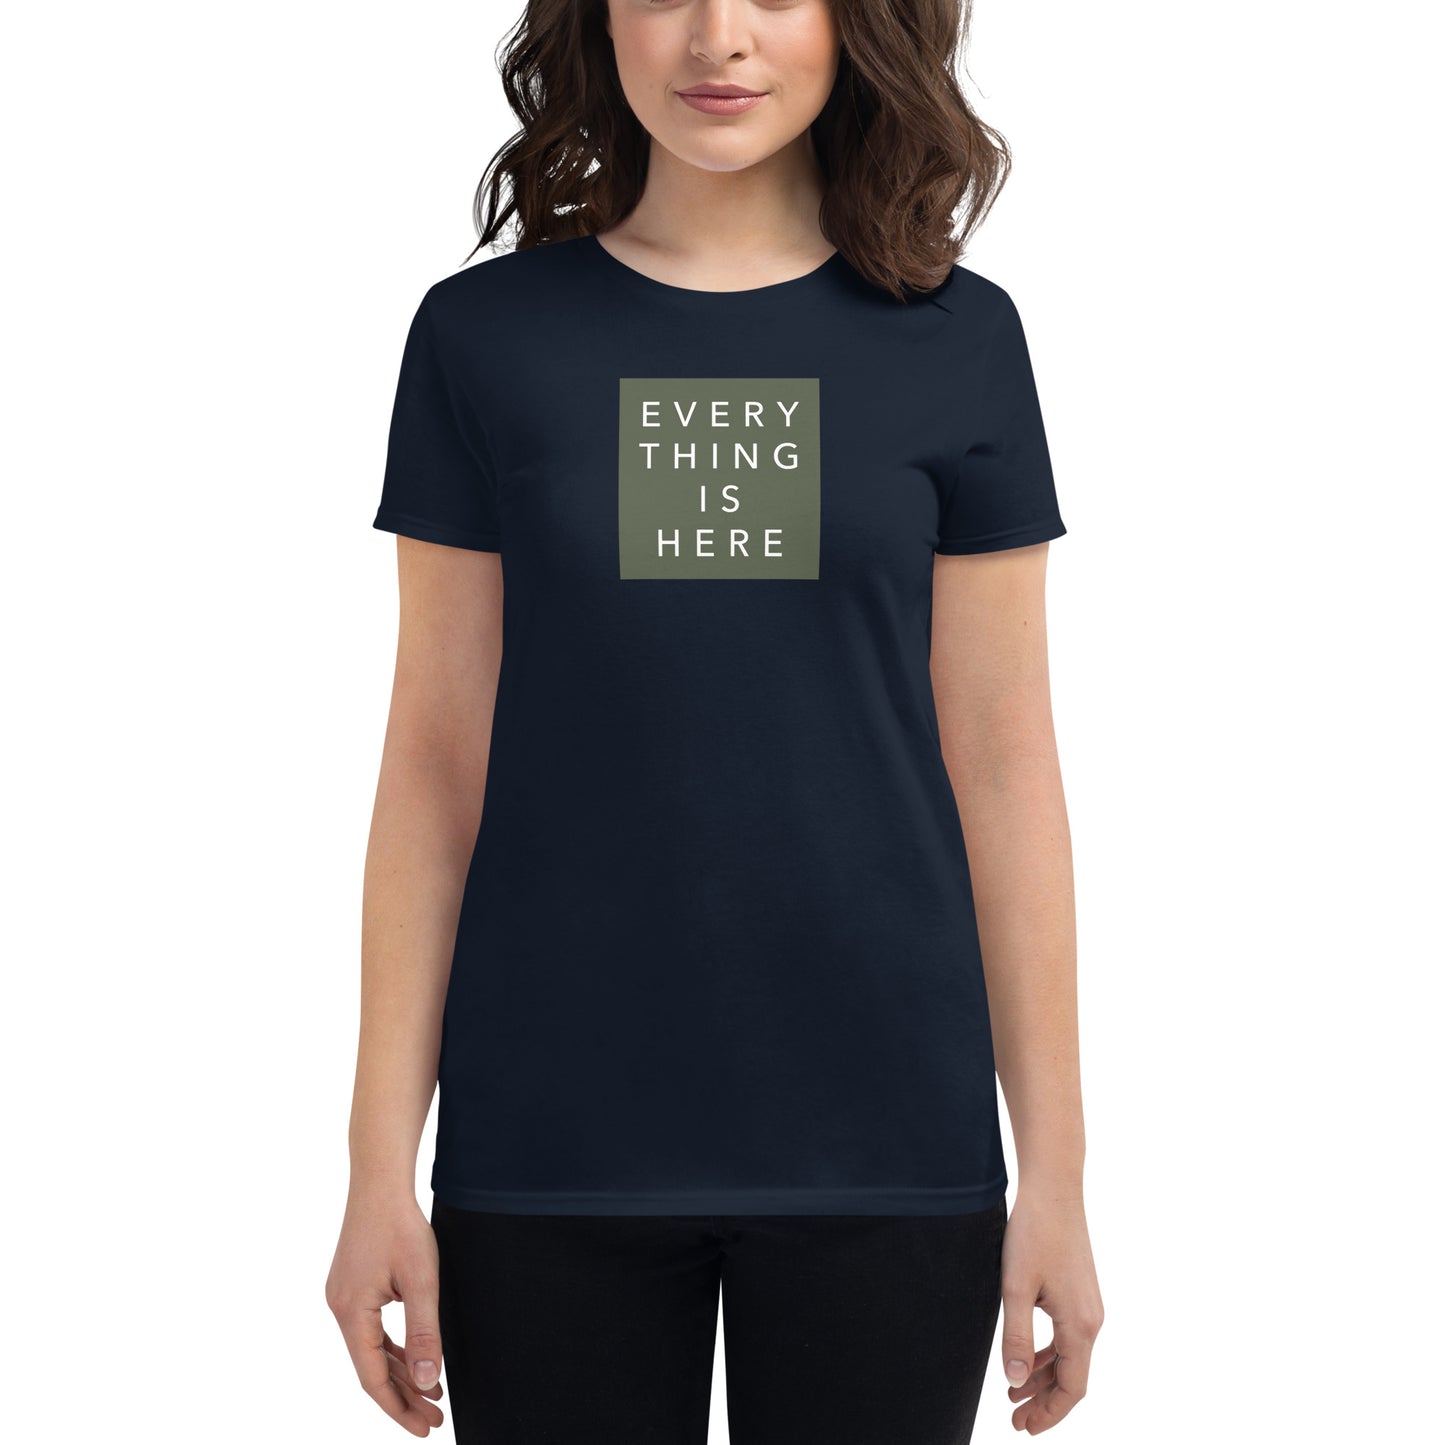 Everything is Here - Women's short sleeve t-shirt